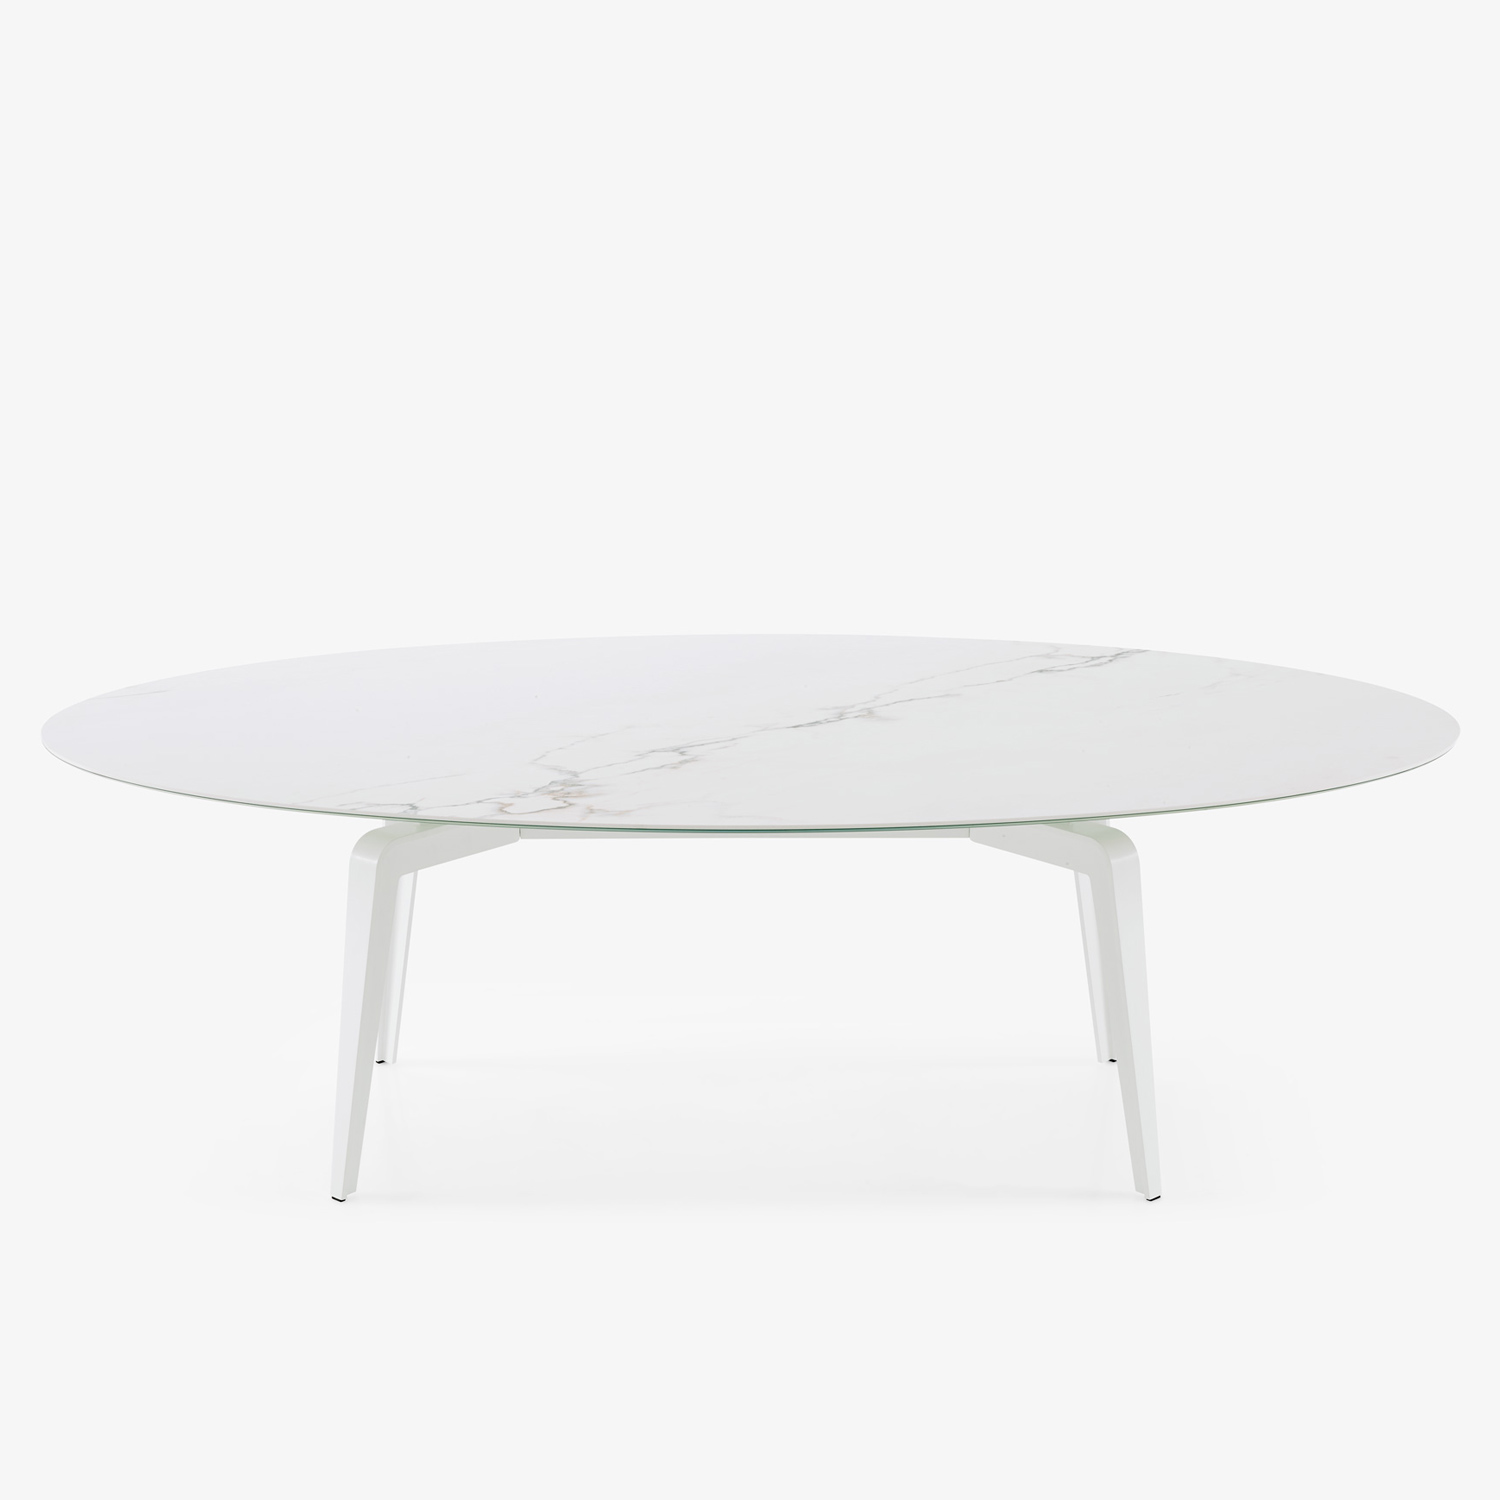 Image OVAL DINING TABLE WHITE LACQUERED BASE 